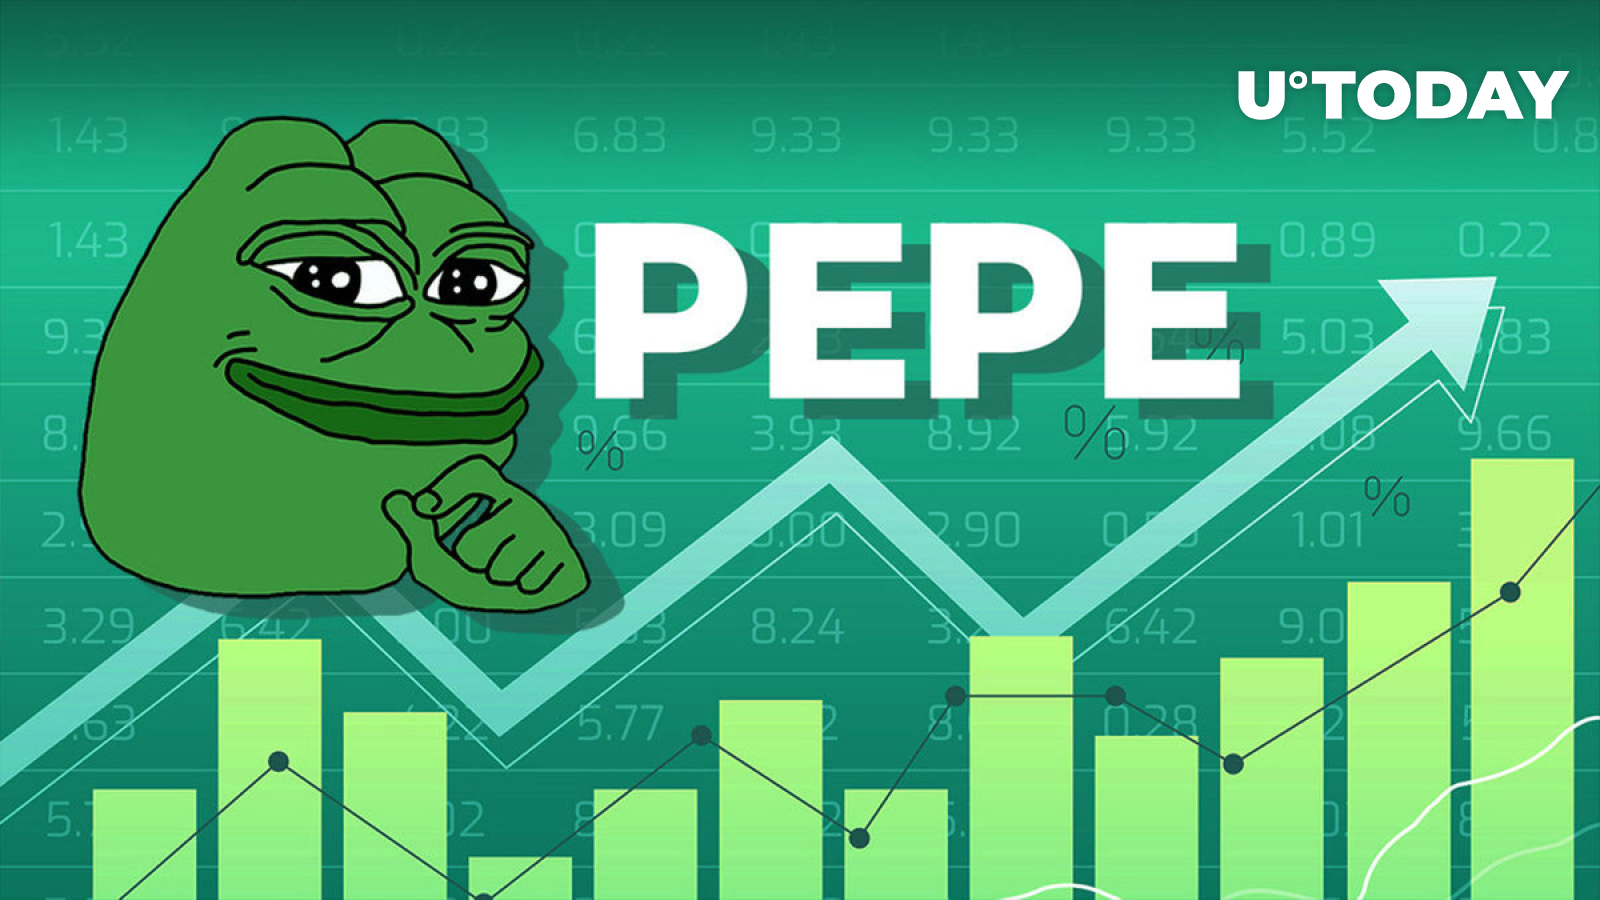 PEPE Joins Bitcoin's Monster Rally as Price Jumps 43%